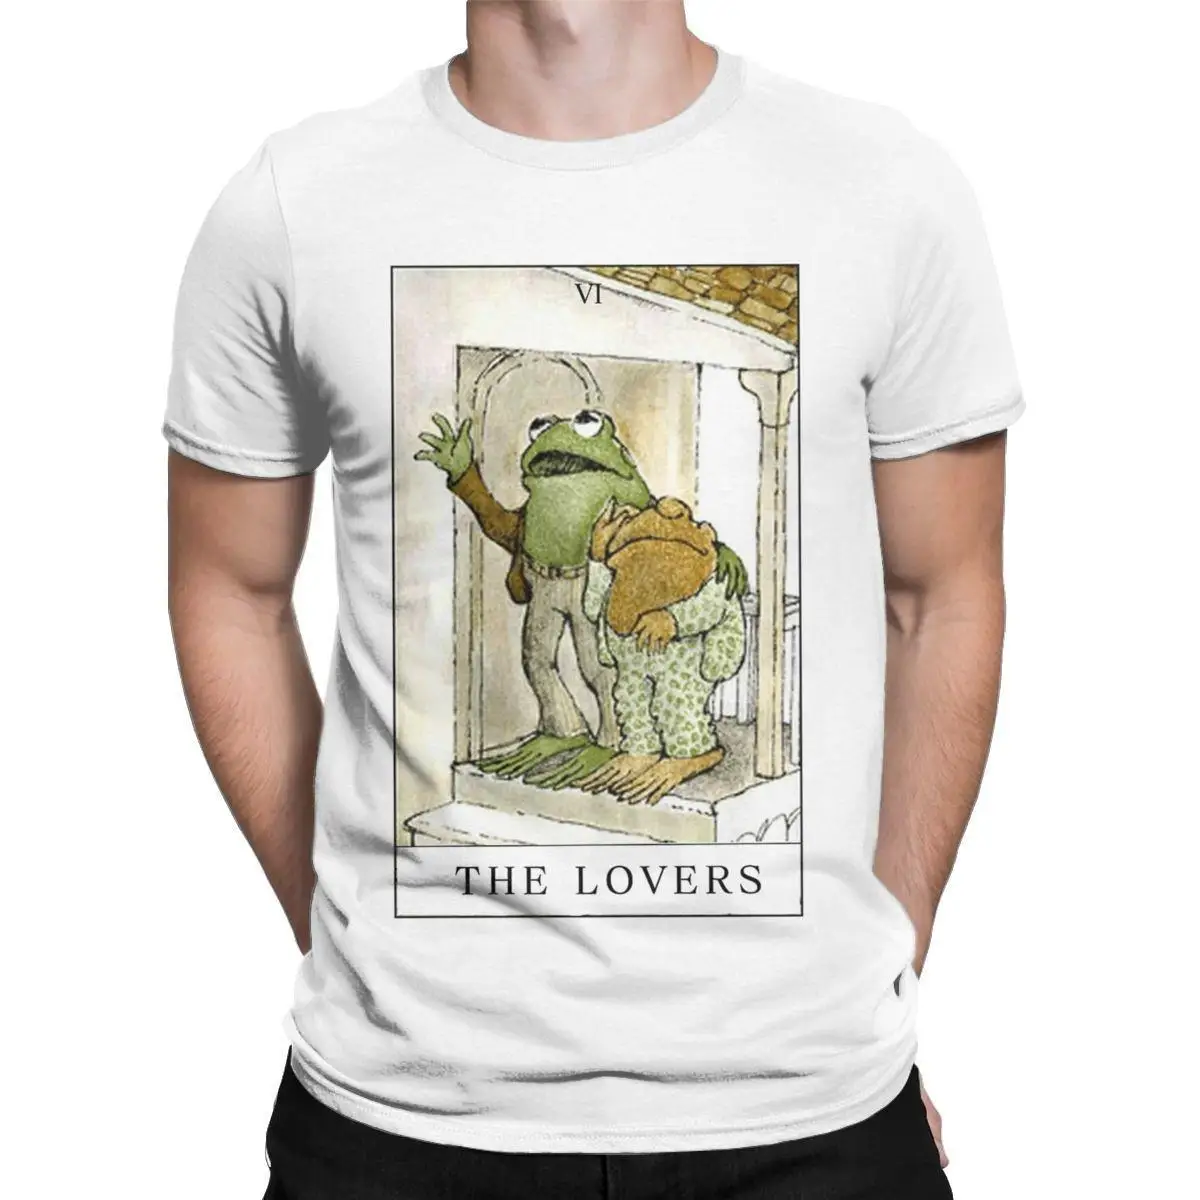 Men Frog And Toad The Lovers T Shirt LGBT Cotton Tops Vintage Short Sleeve Crew Neck Tee Shirt Classic T-Shirts